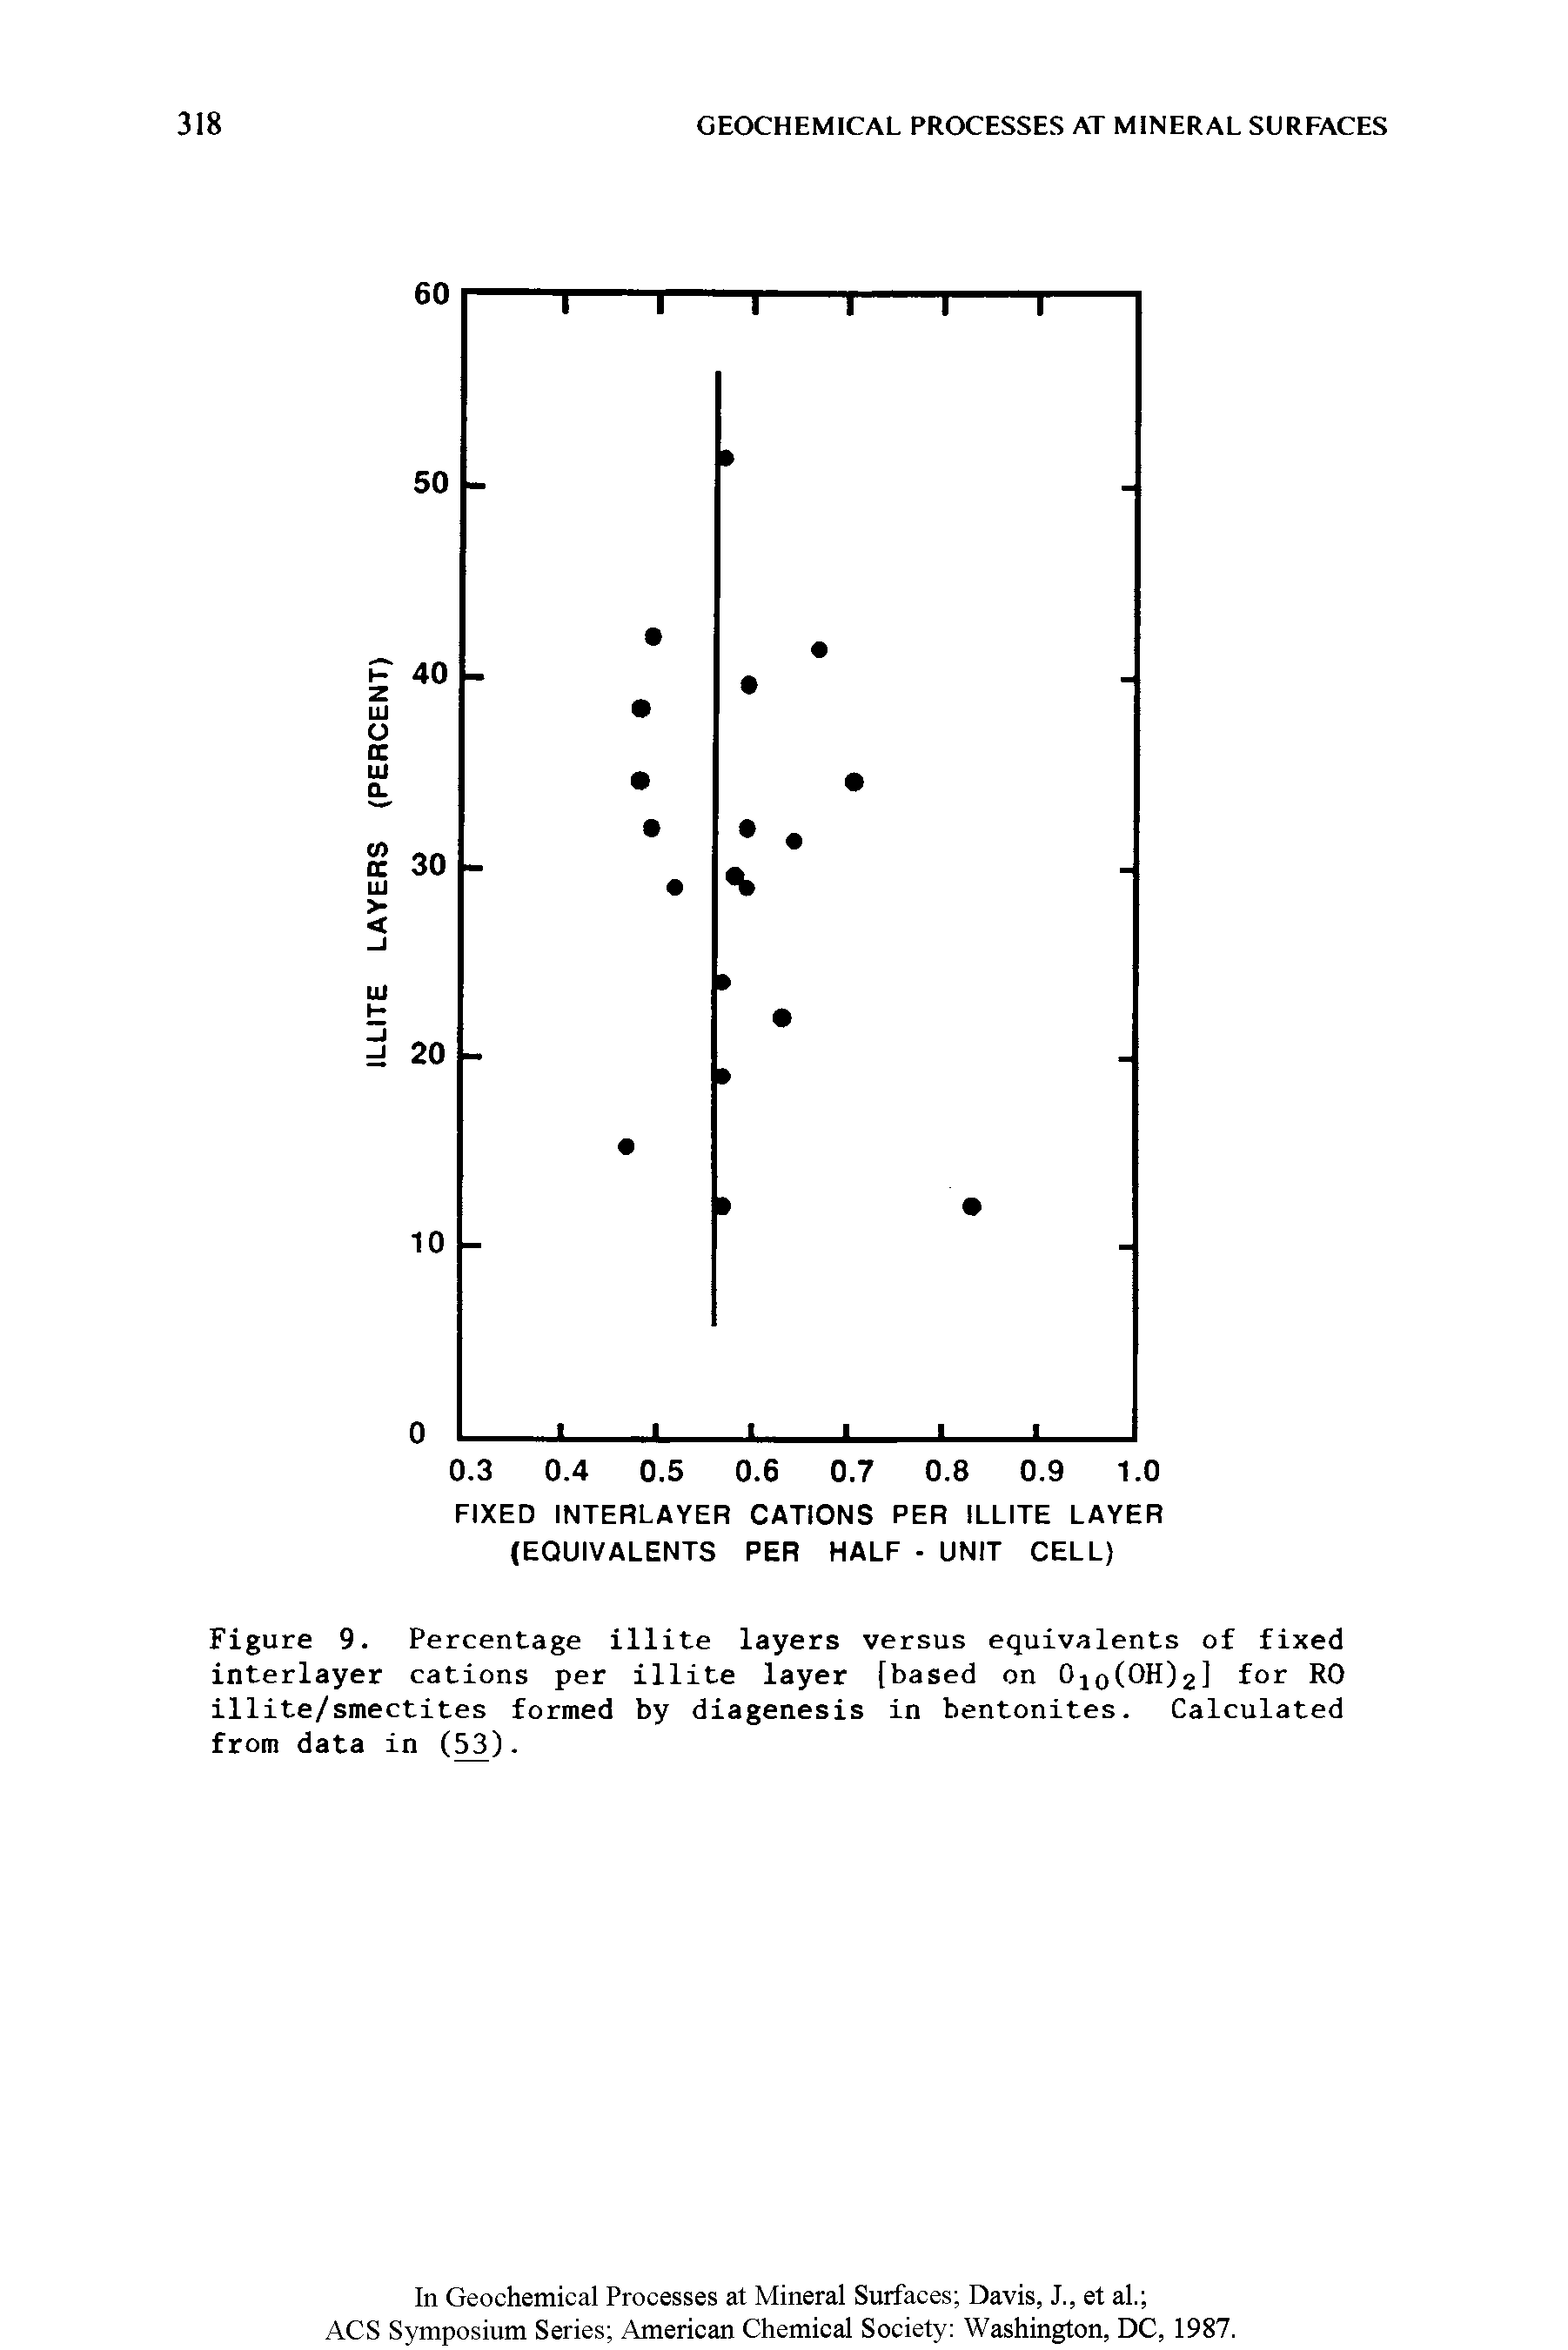 Figure 9. Percentage illite layers versus equivalents of fixed interlayer cations per illite layer [based on 010(OH)2] for RO illite/smectites formed by diagenesis in bentonites. Calculated from data in (53).